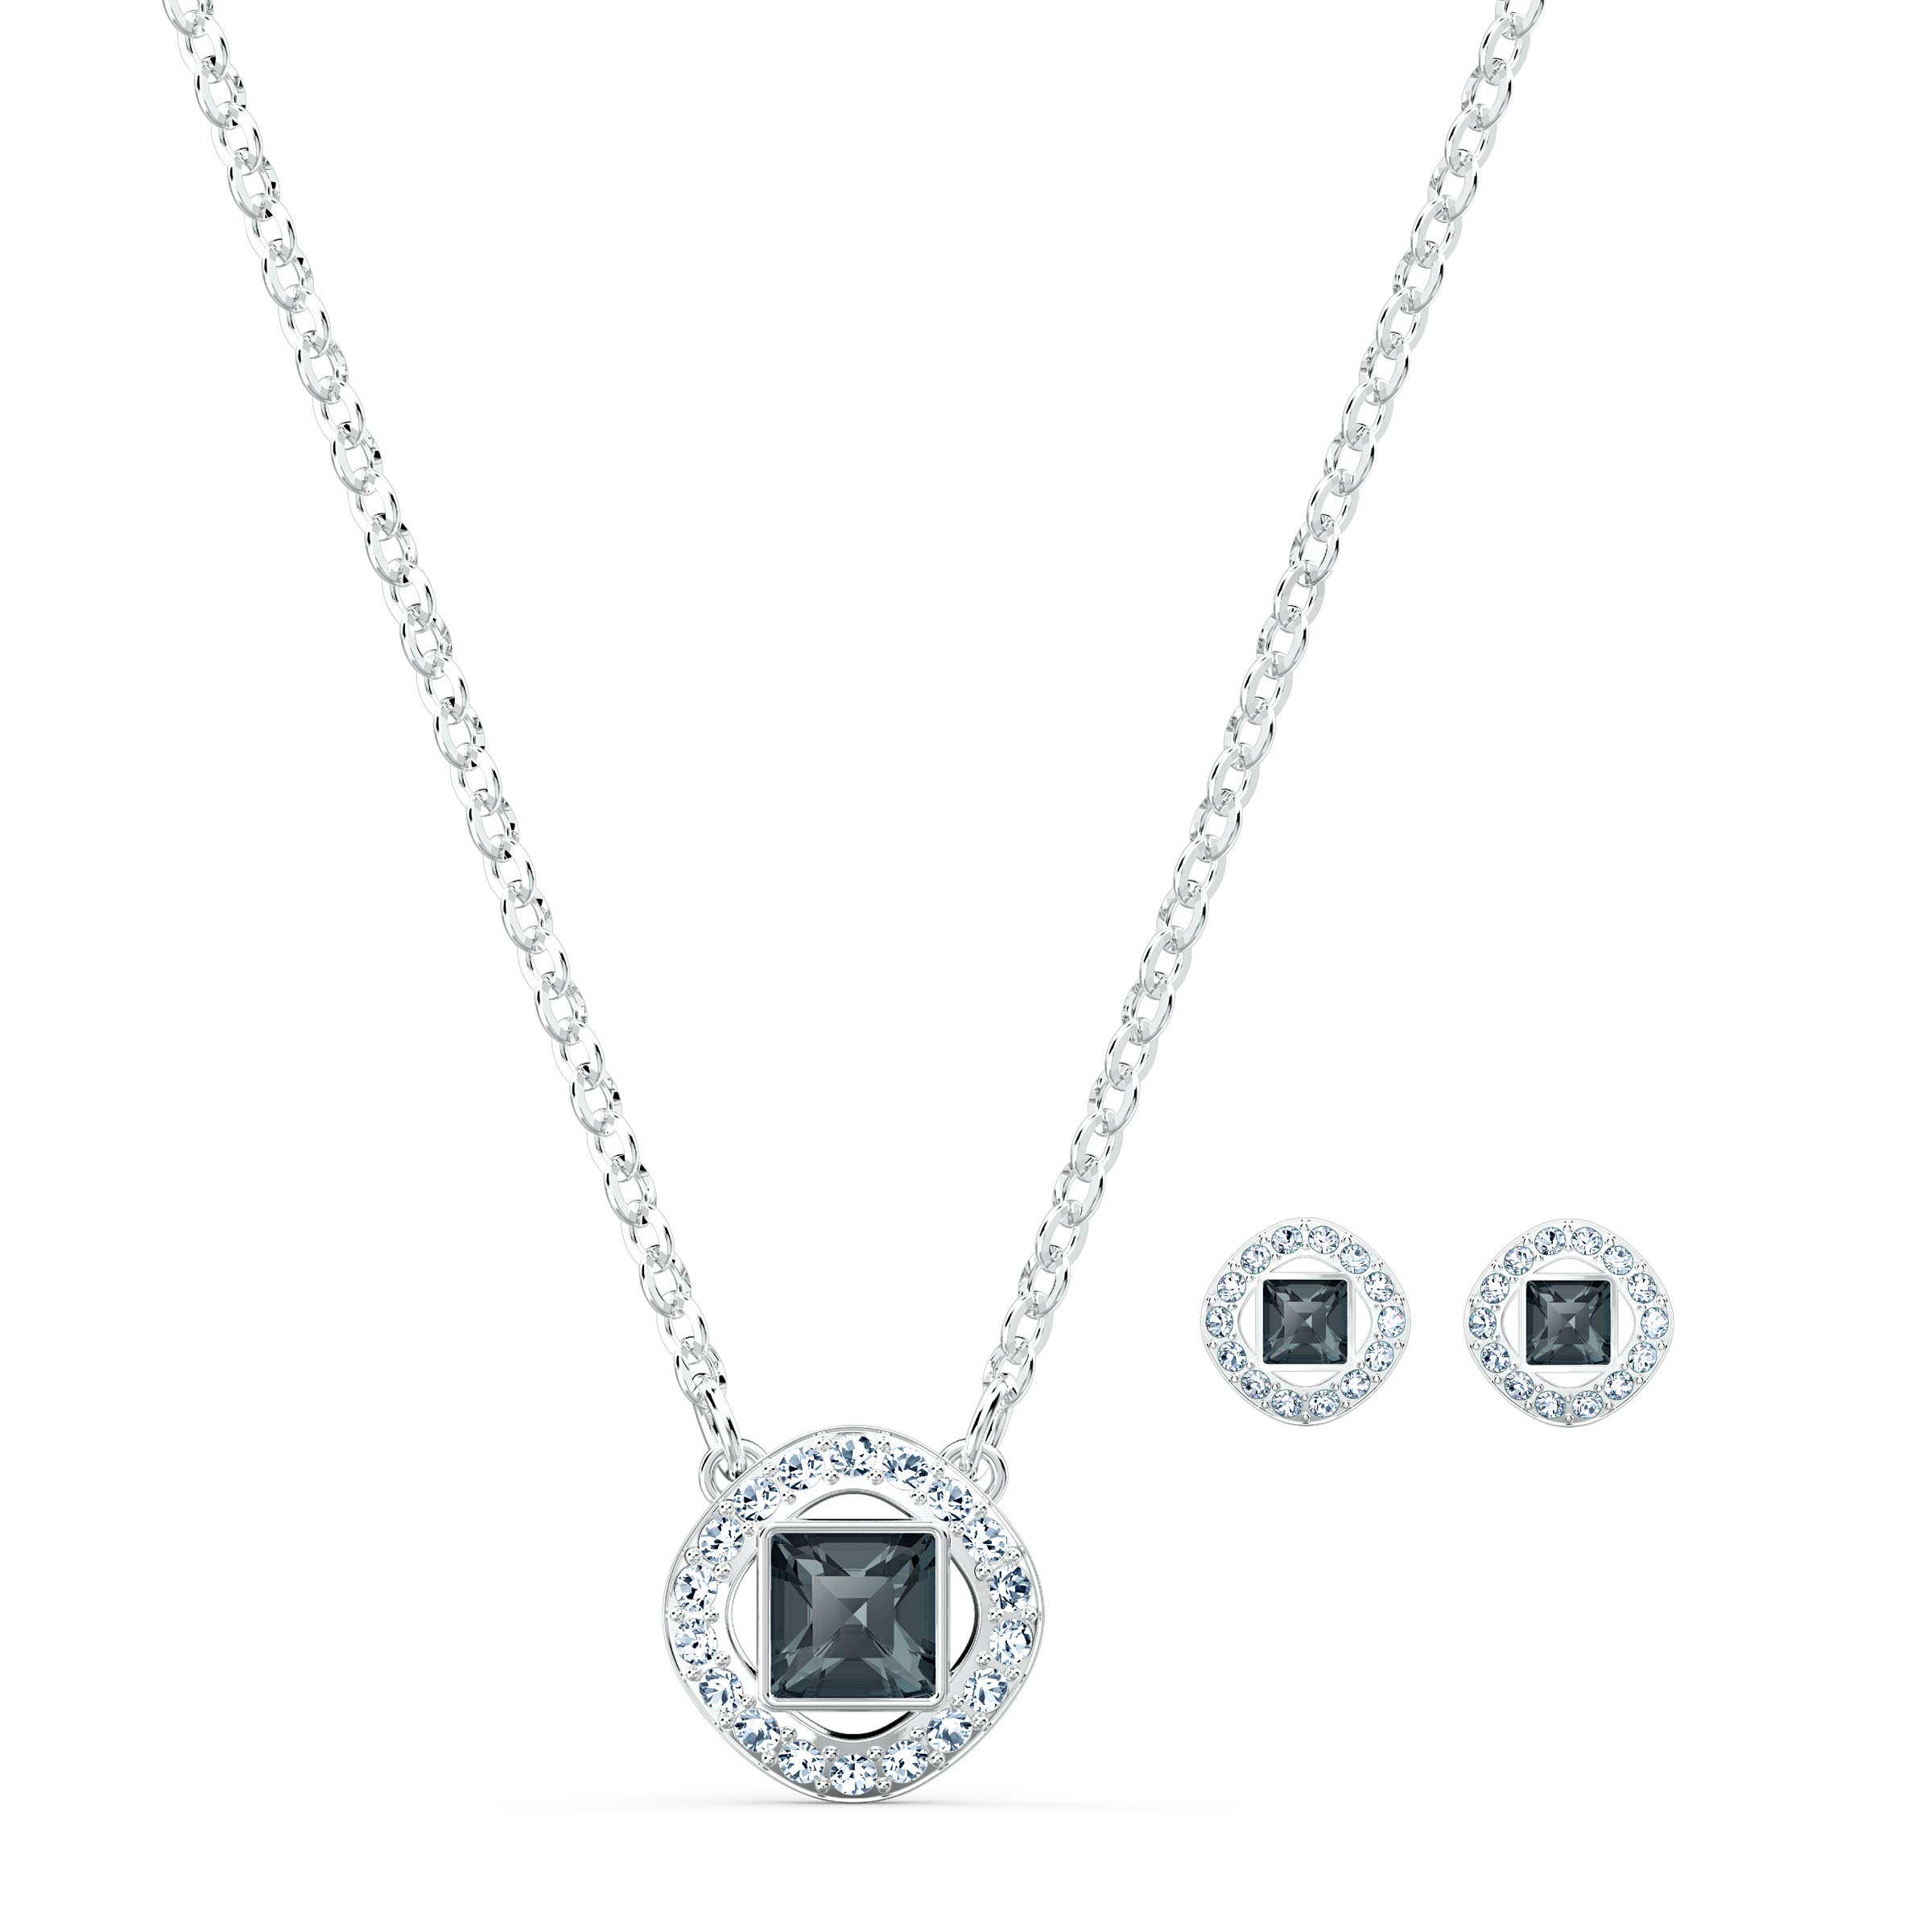 Swarovski womens Necklace Set with Mixed Metal Plated chains, clear and colored crystals